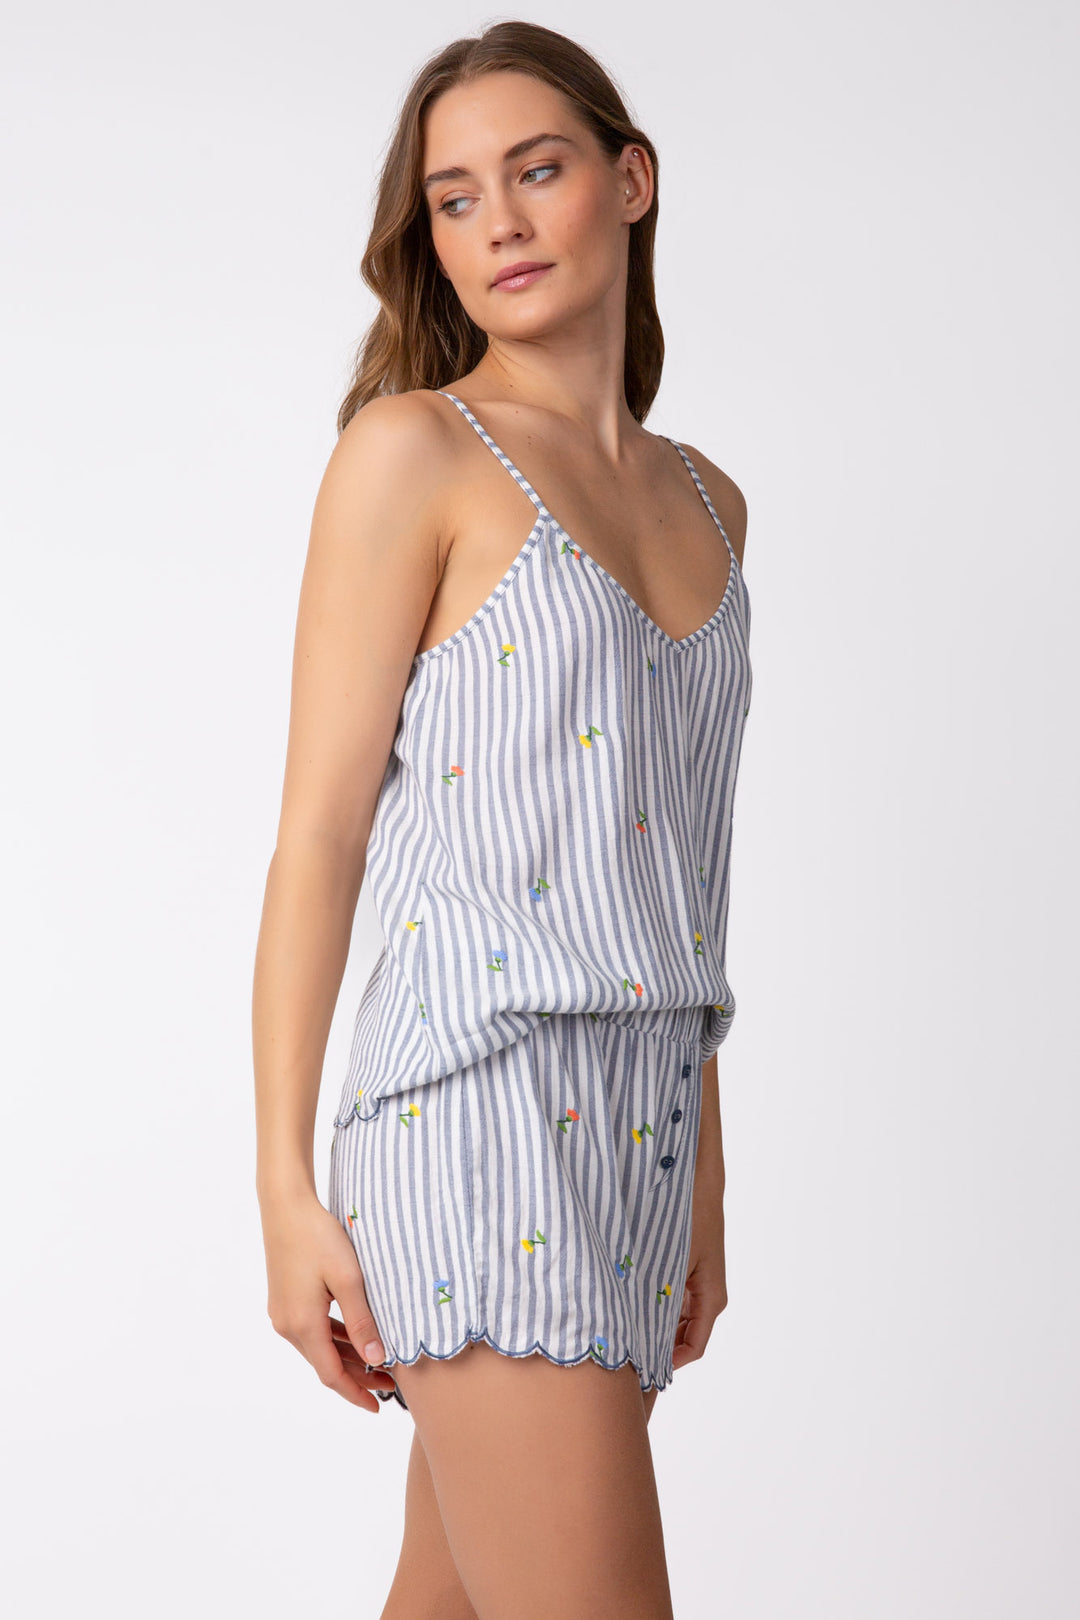 Sleep set cami top + short in yarn-dye striped woven with mini embroidered flowers.